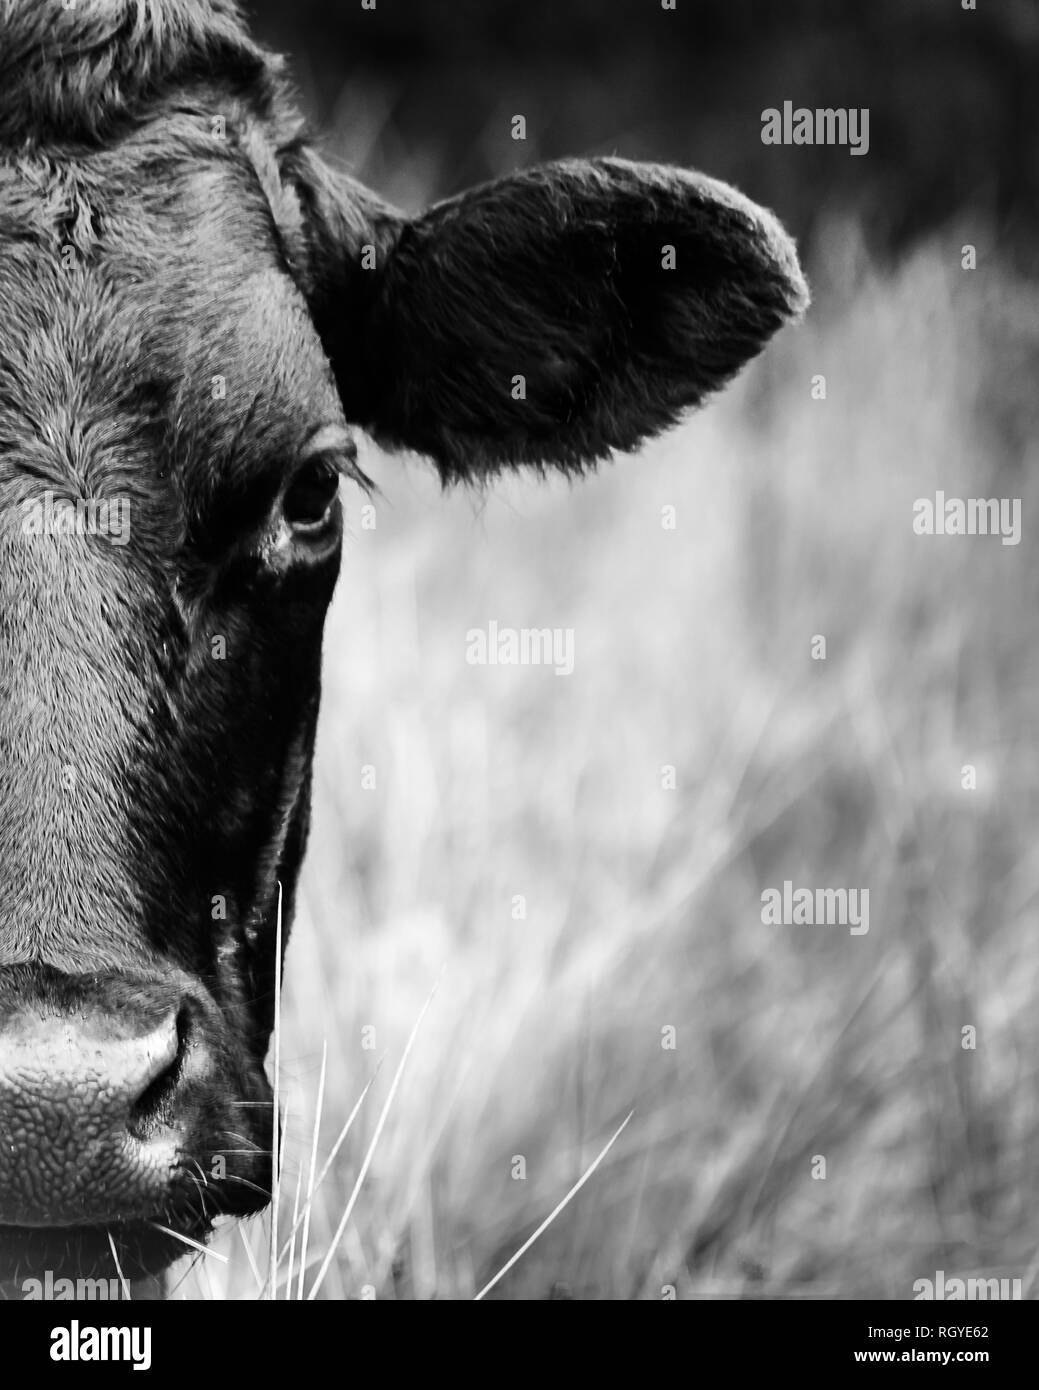 The right half of a black cow's head, looking at the camera, stood in a field Stock Photo